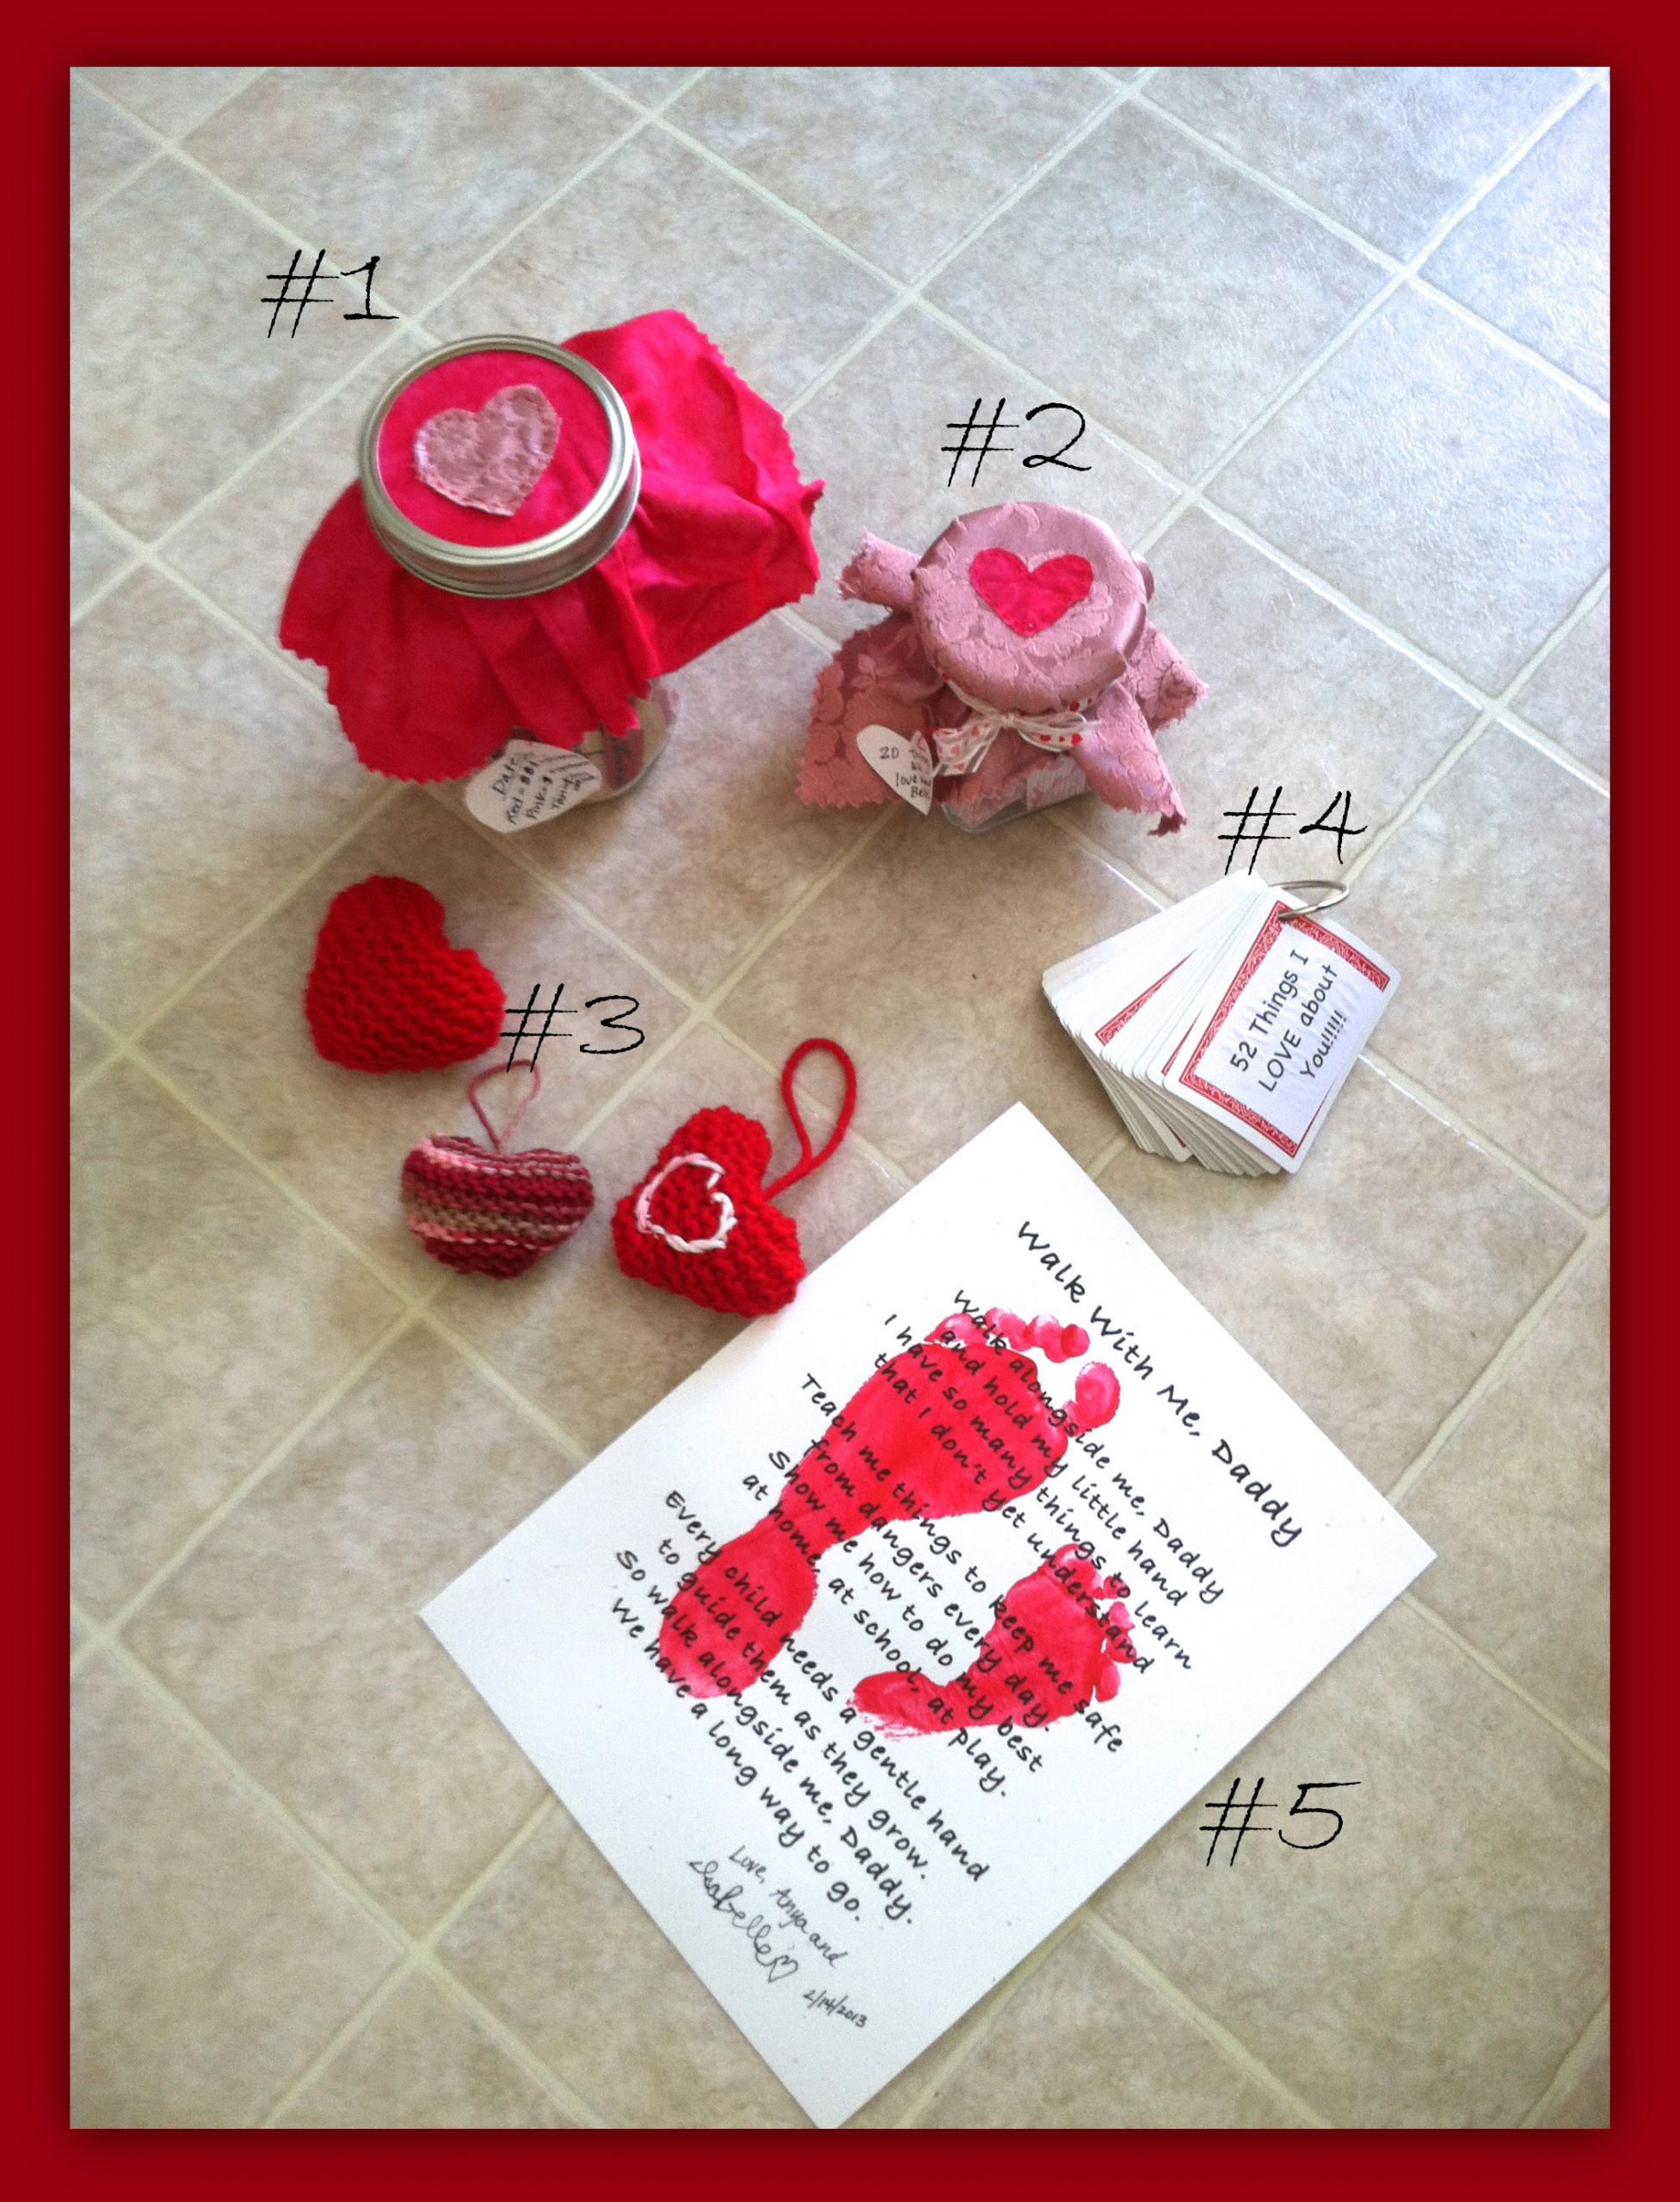 Valentine Day Handmade Gift Ideas
 Easy DIY Handmade Valentine’s Day Gifts that YOU can make